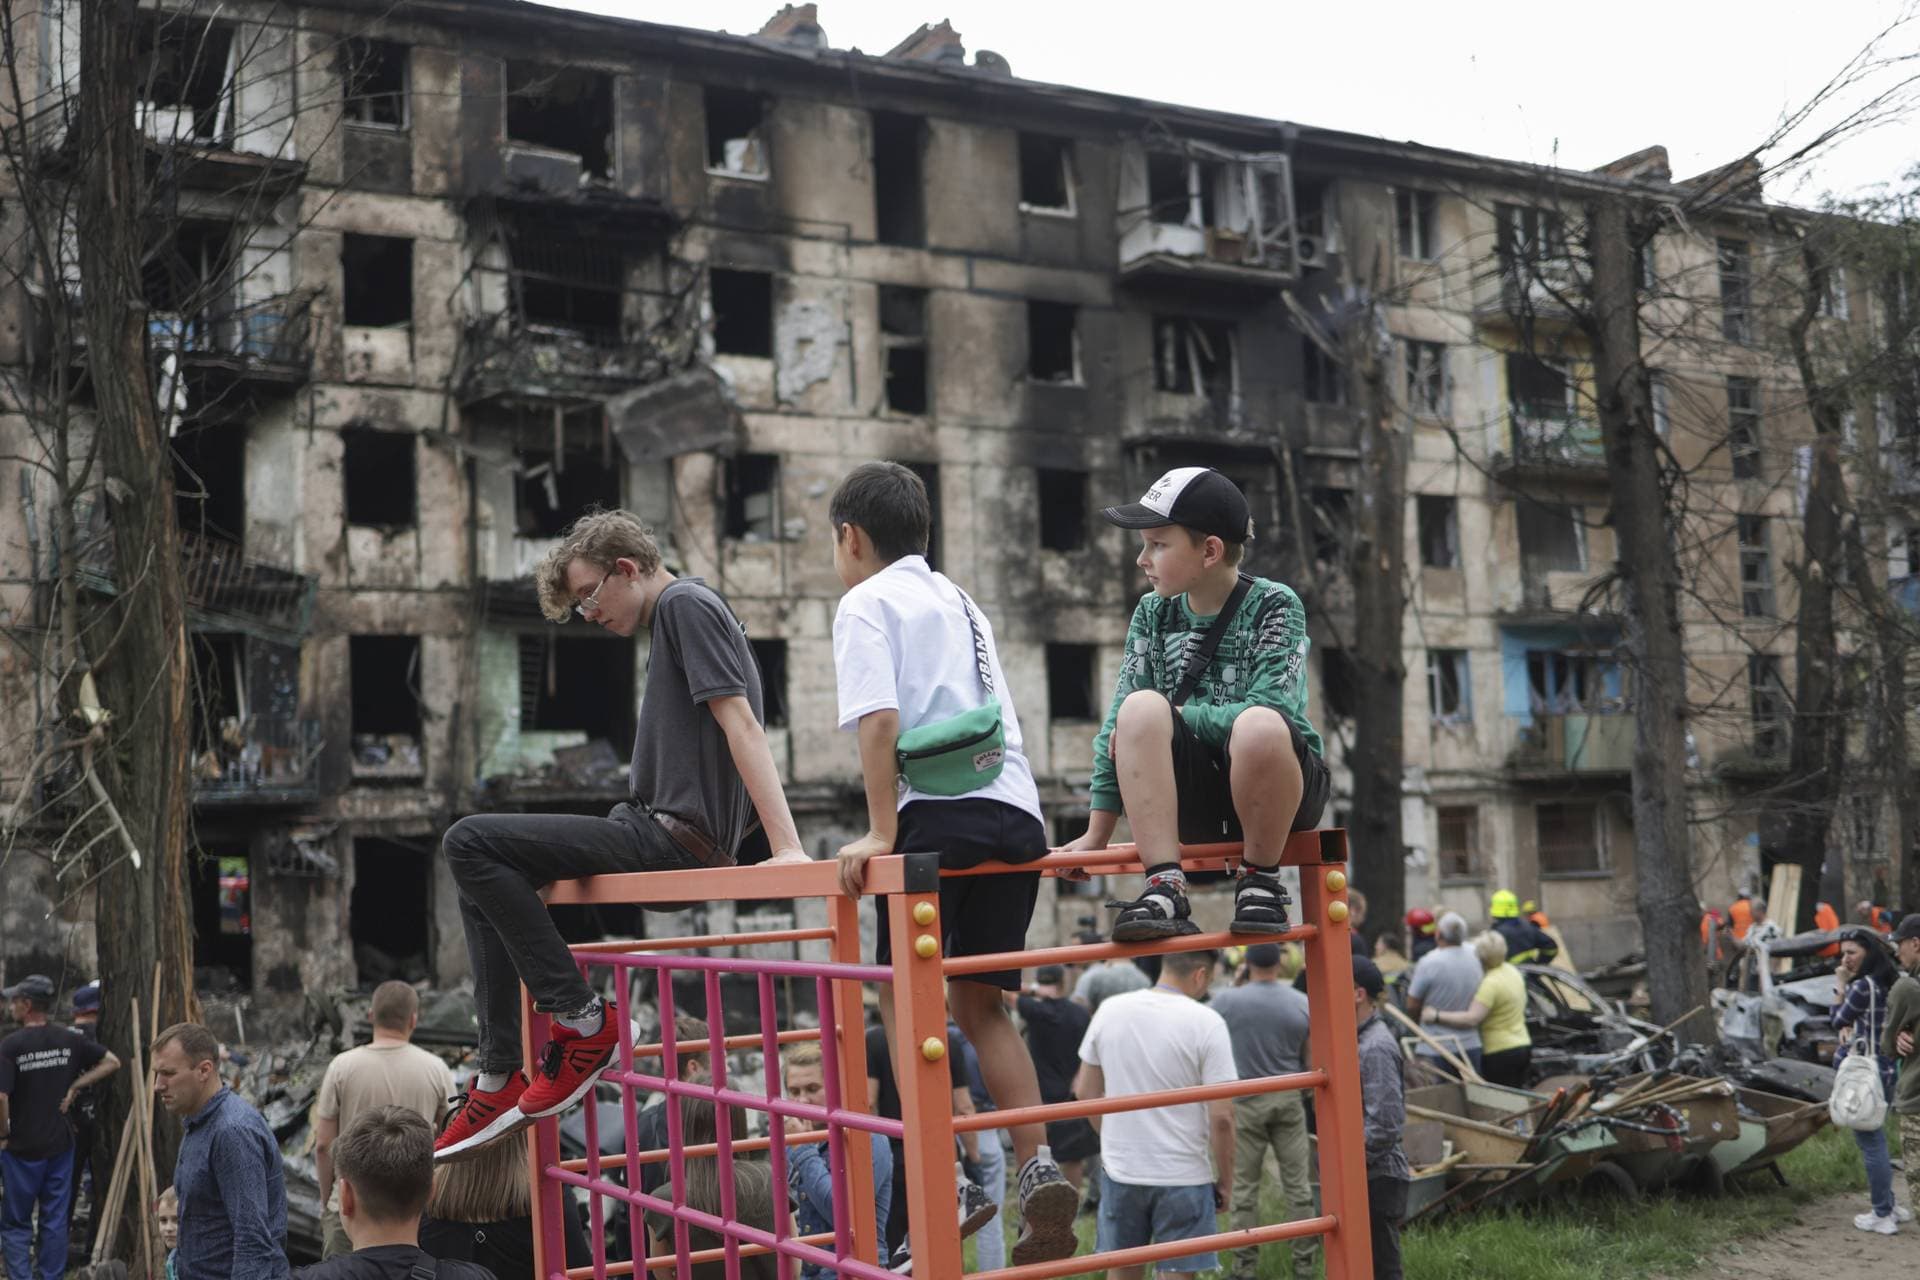 Children look at the scene of the latest Russian rocket attack that damaged a multi-storey apartment building in Kryvyi Rih